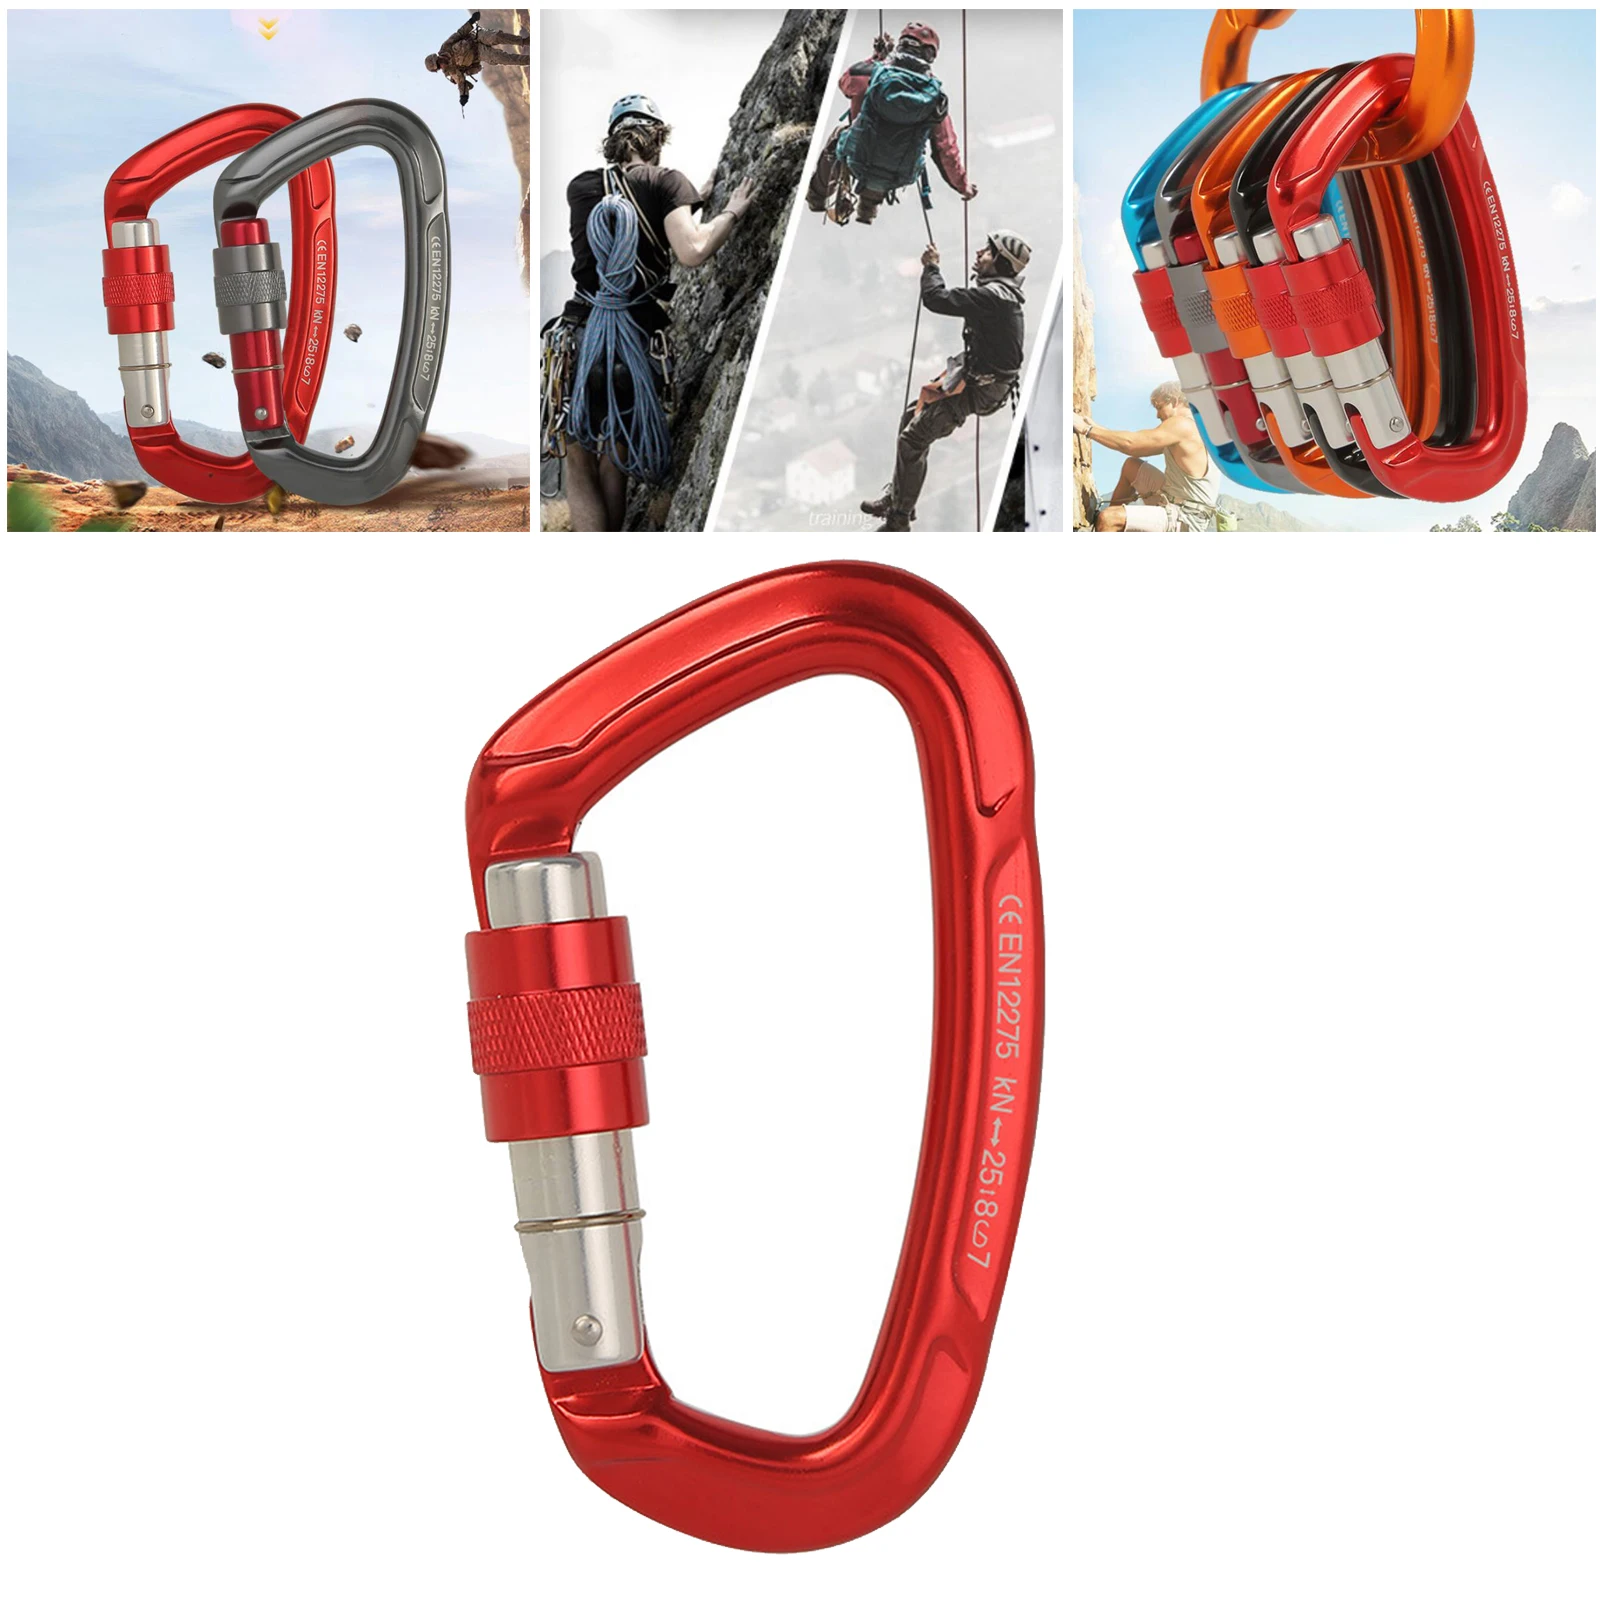 25kn Climbing Carabiner Clip Rappelling High Strength Carabiners Safety Gear